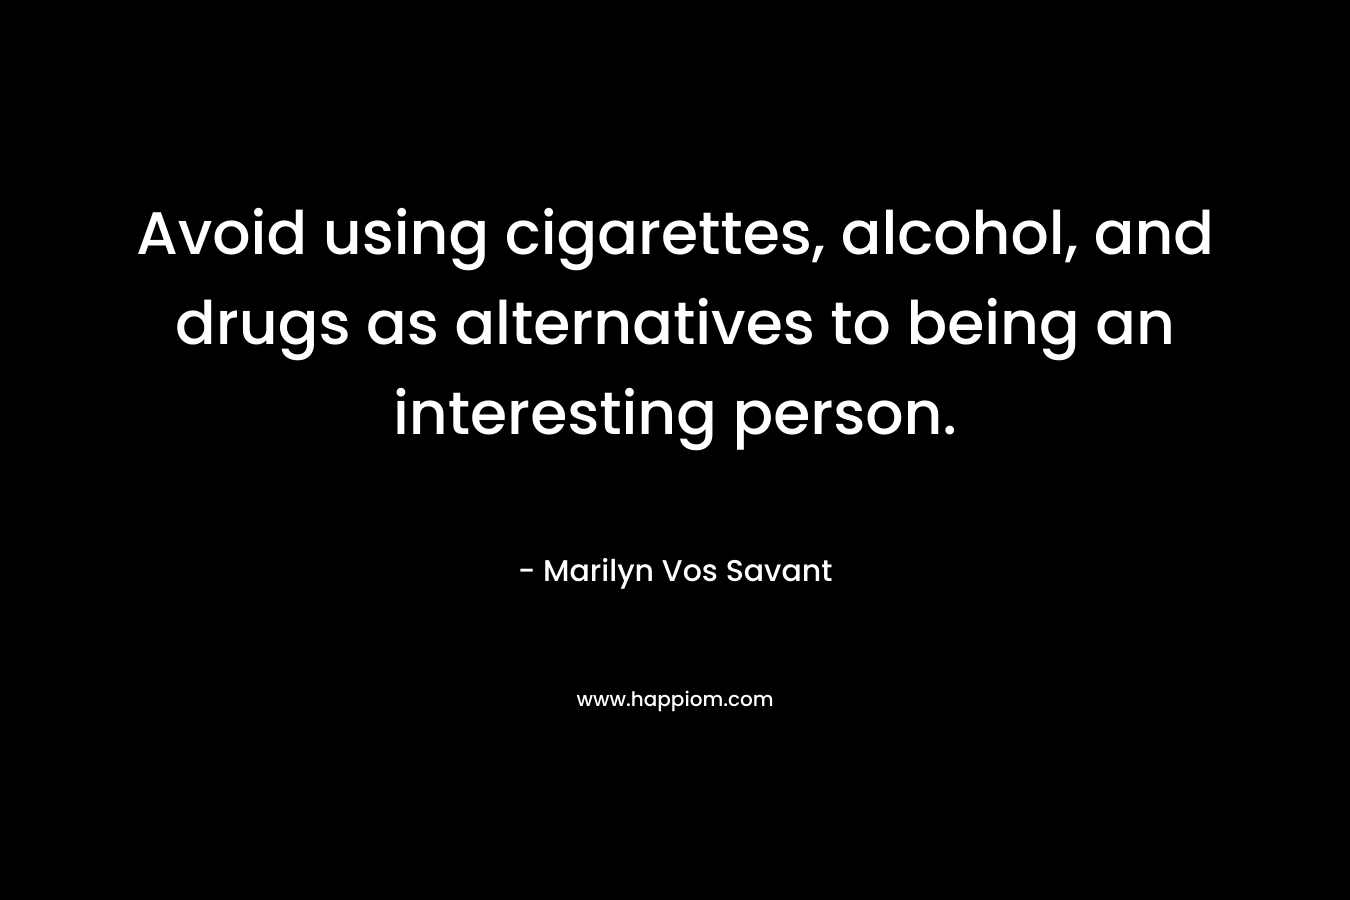 Avoid using cigarettes, alcohol, and drugs as alternatives to being an interesting person. – Marilyn Vos Savant